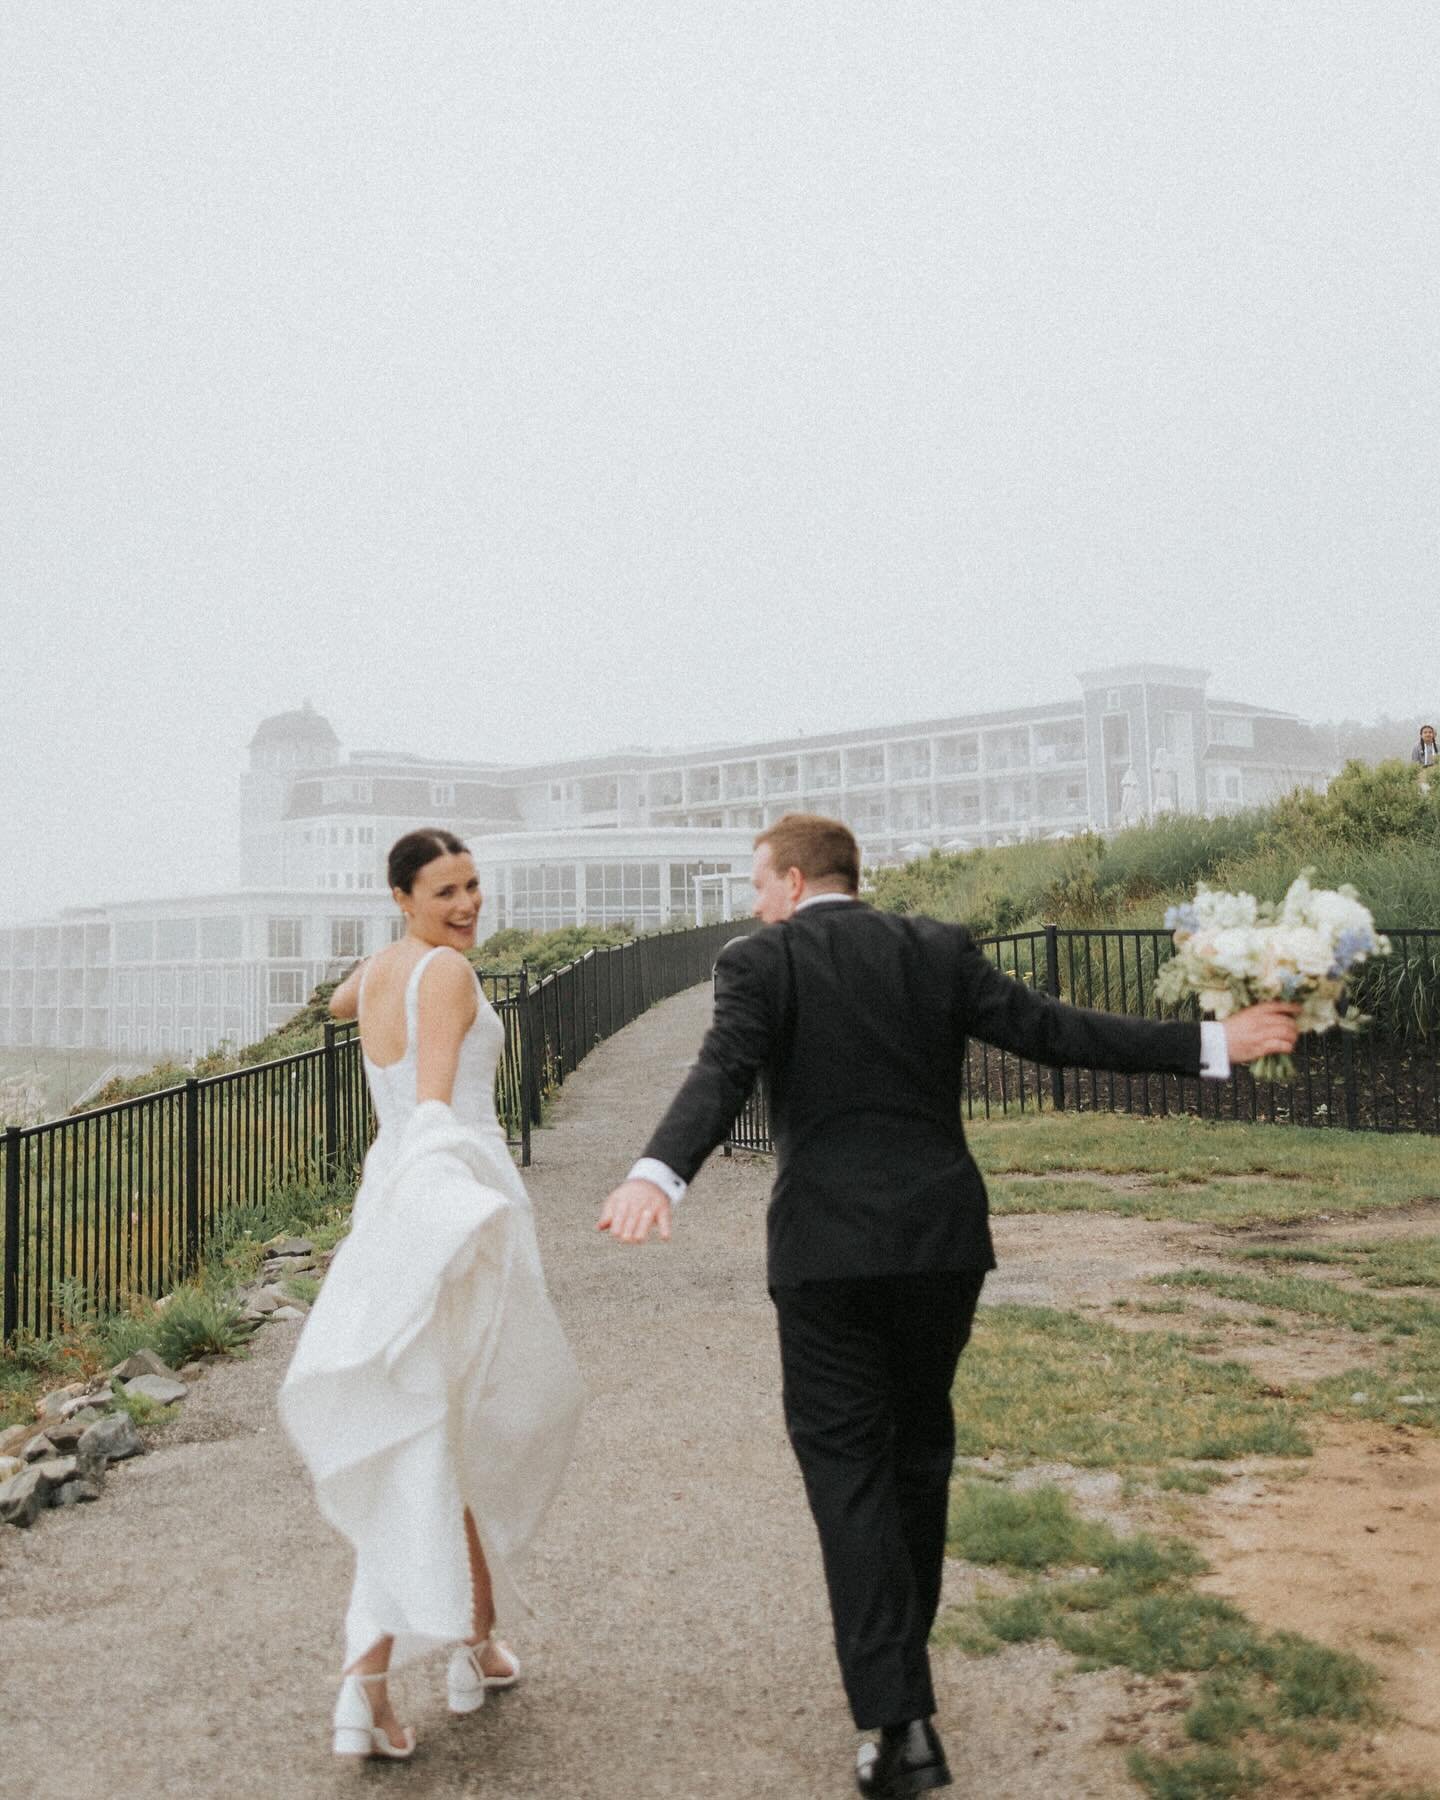 A classic blue and white coastal wedding with a twist @cliffhousemaine 🌊. Even in the fog and rain, these two were smiling in every picture 🤍

Photo // @courtney_elizabeth_media
Venue // @cliffhousemaine
Dessert // @bearbrookbakery
Entertainment //